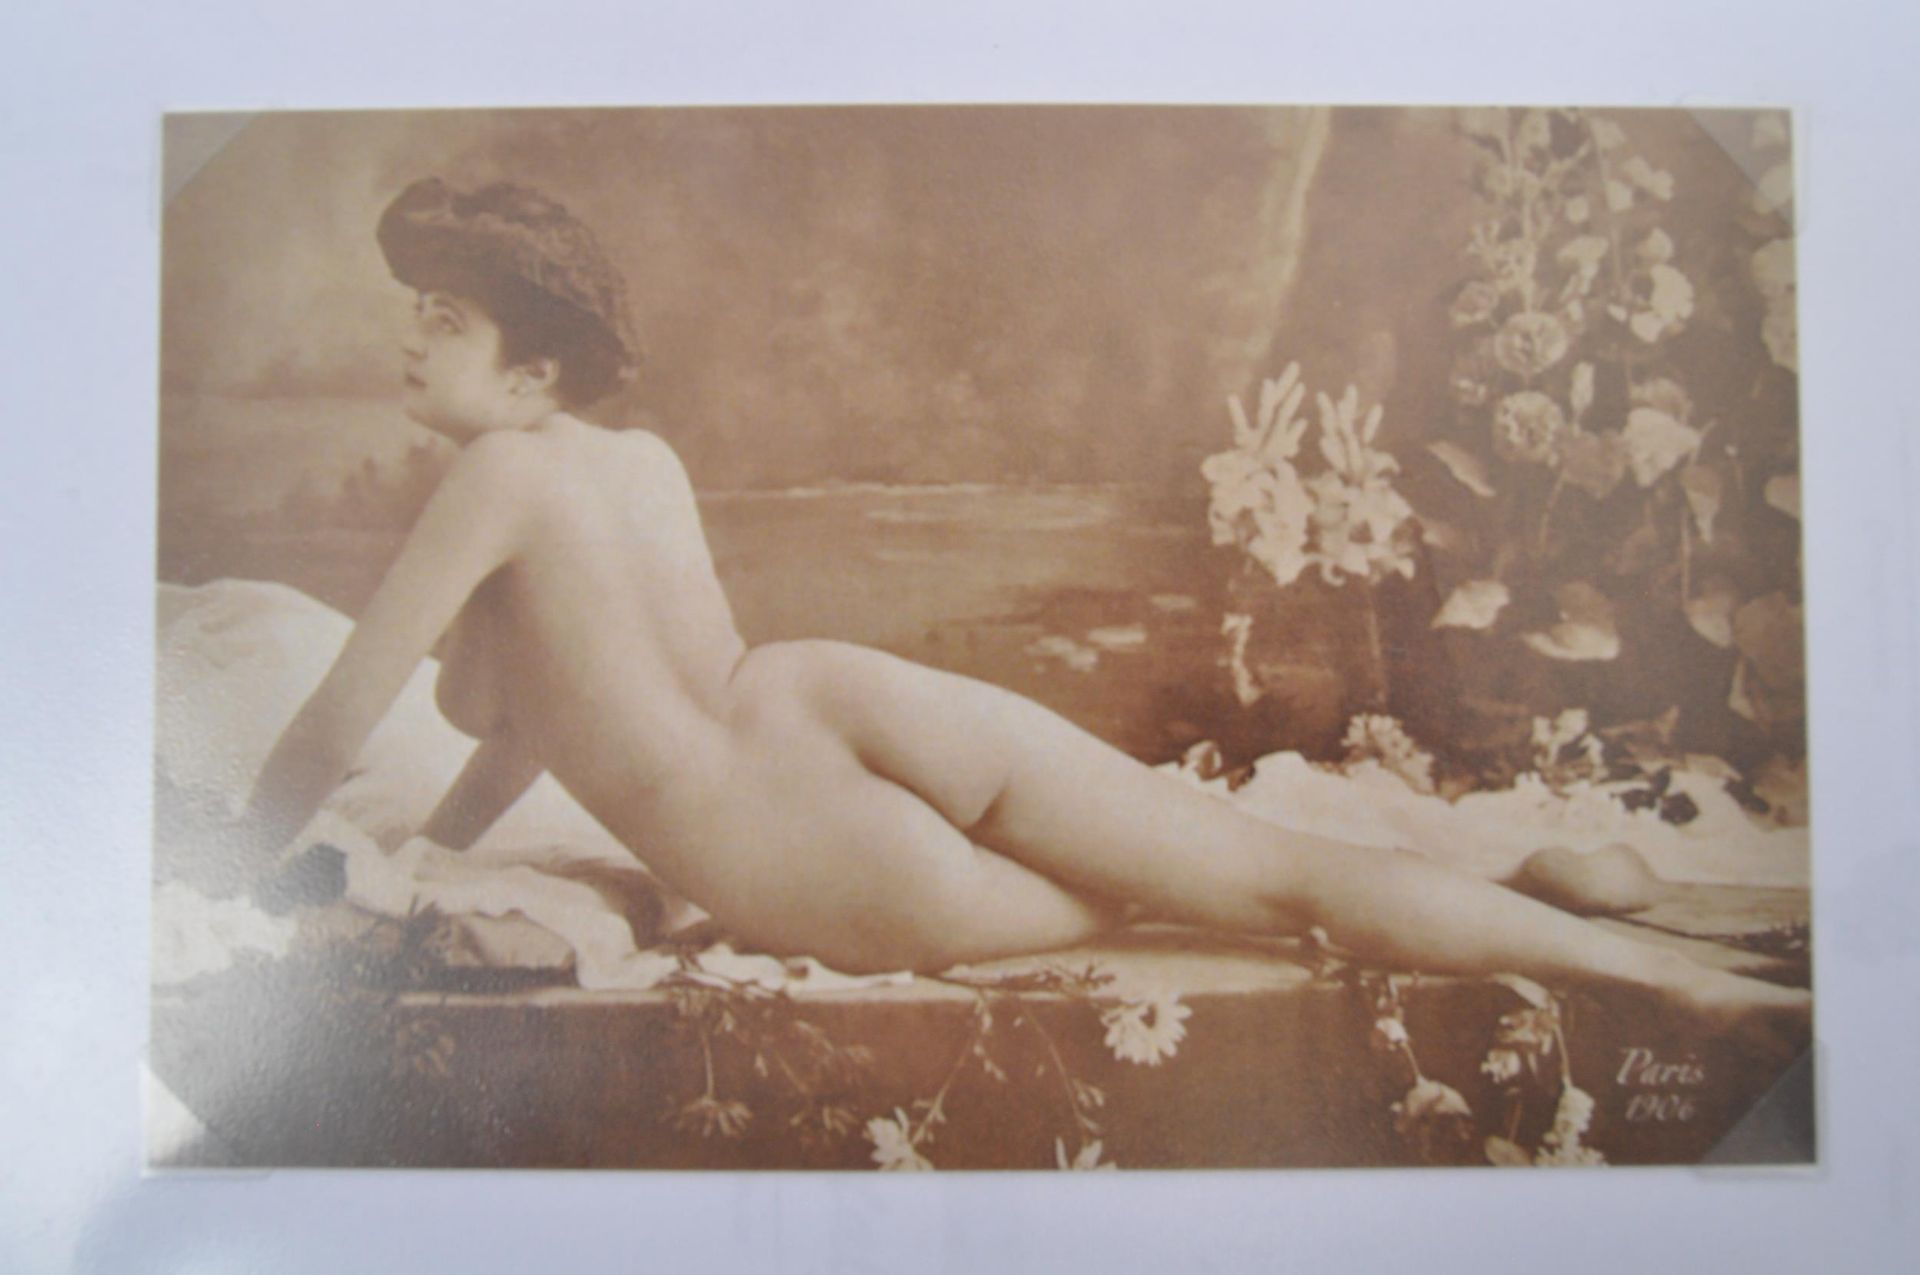 COLLECTION OF 20TH CENTURY FRENCH EROTIC NUDE POSTCARDS - Image 7 of 7